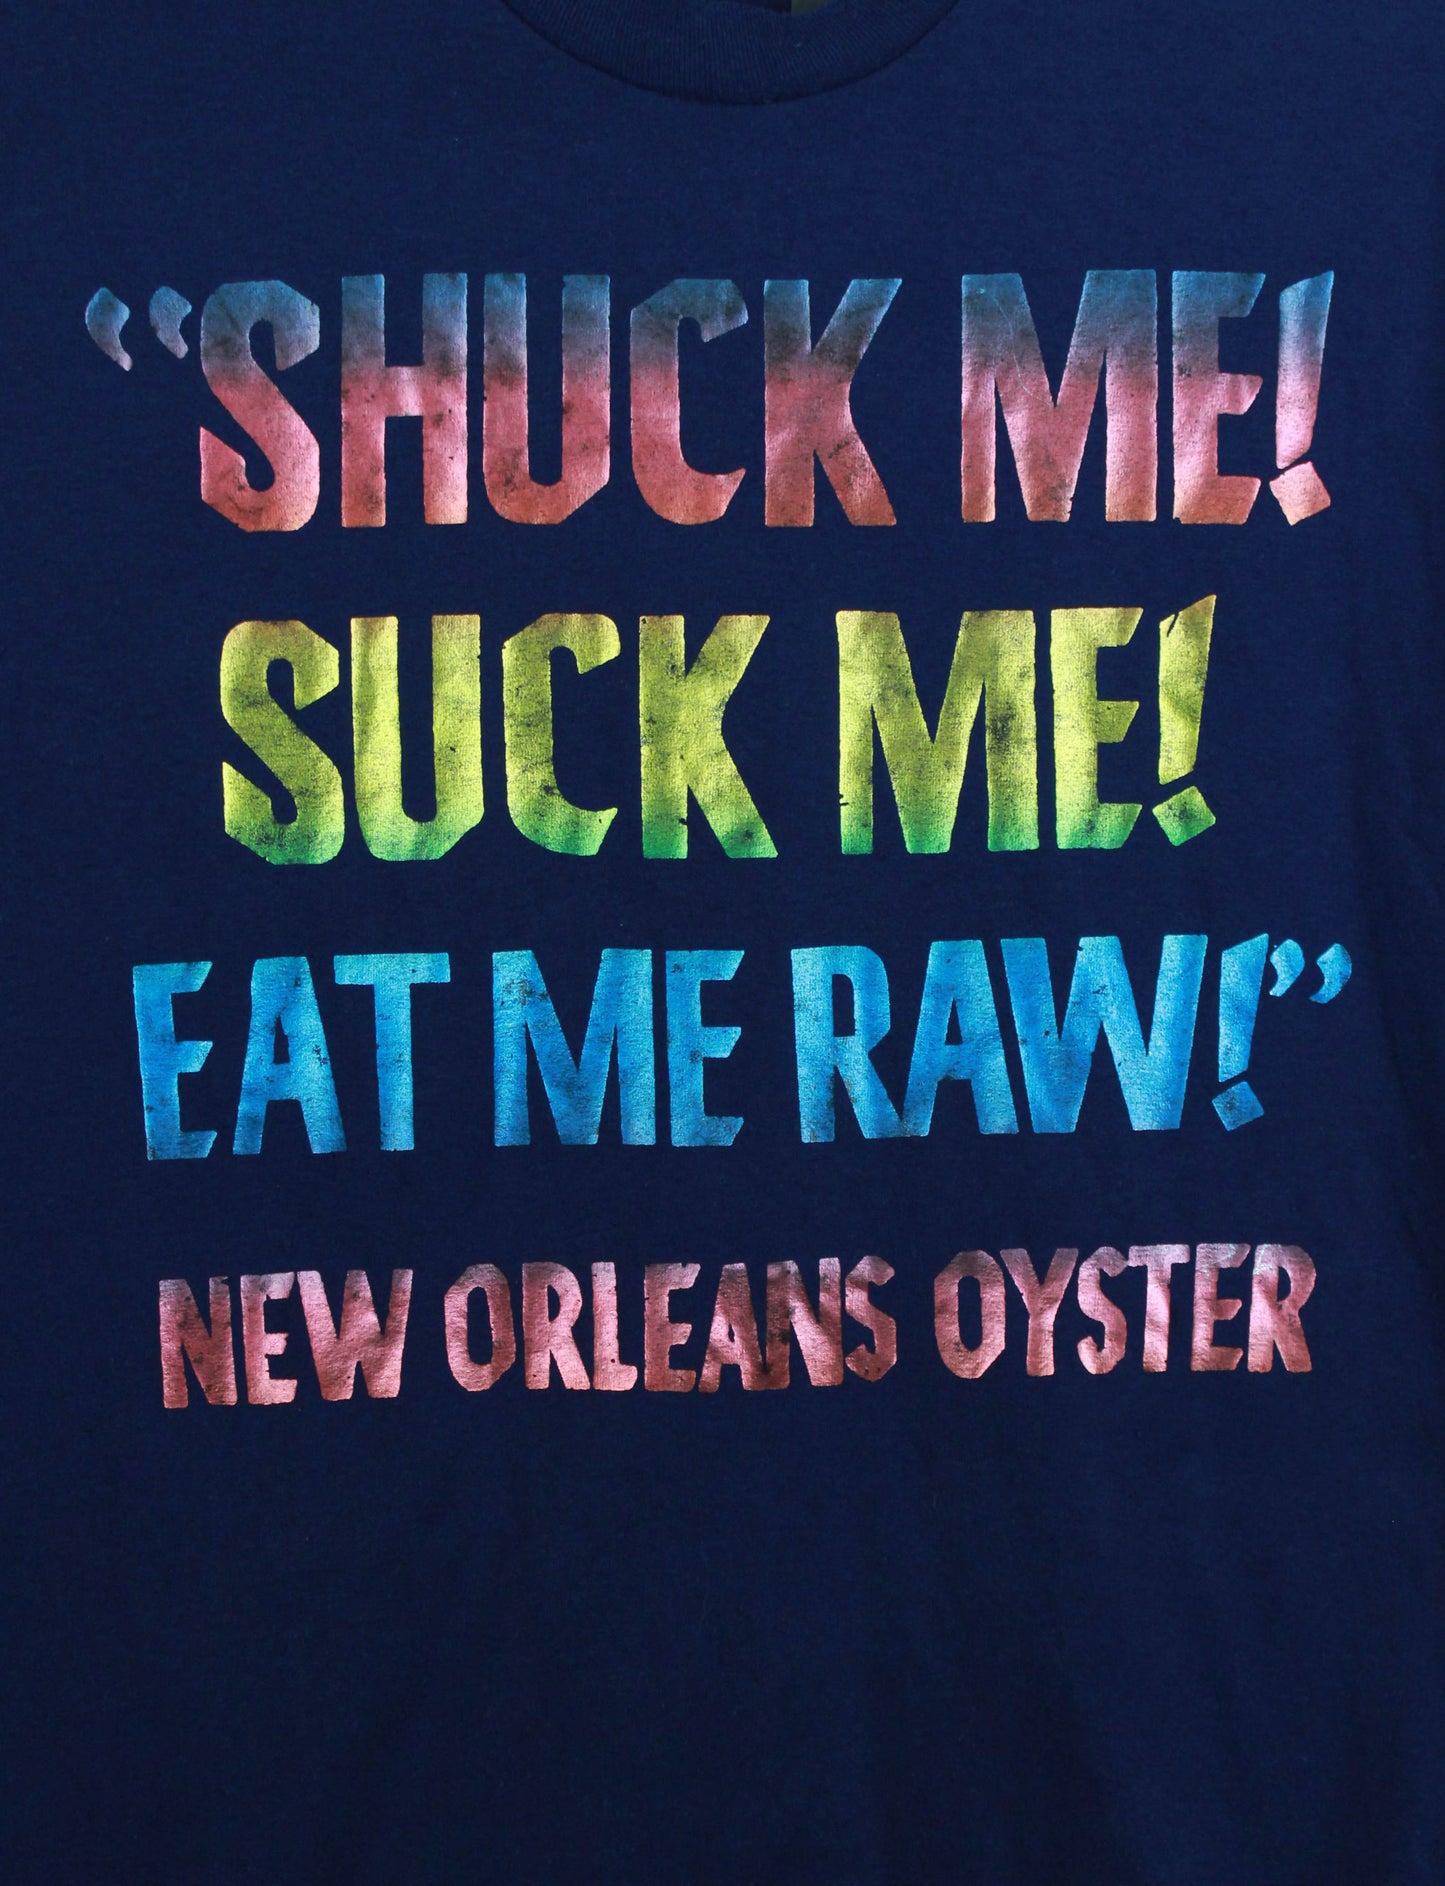 Vintage 80's New Orleans Oyster Graphic T Shirt Holographic Navy Blue Unisex Medium